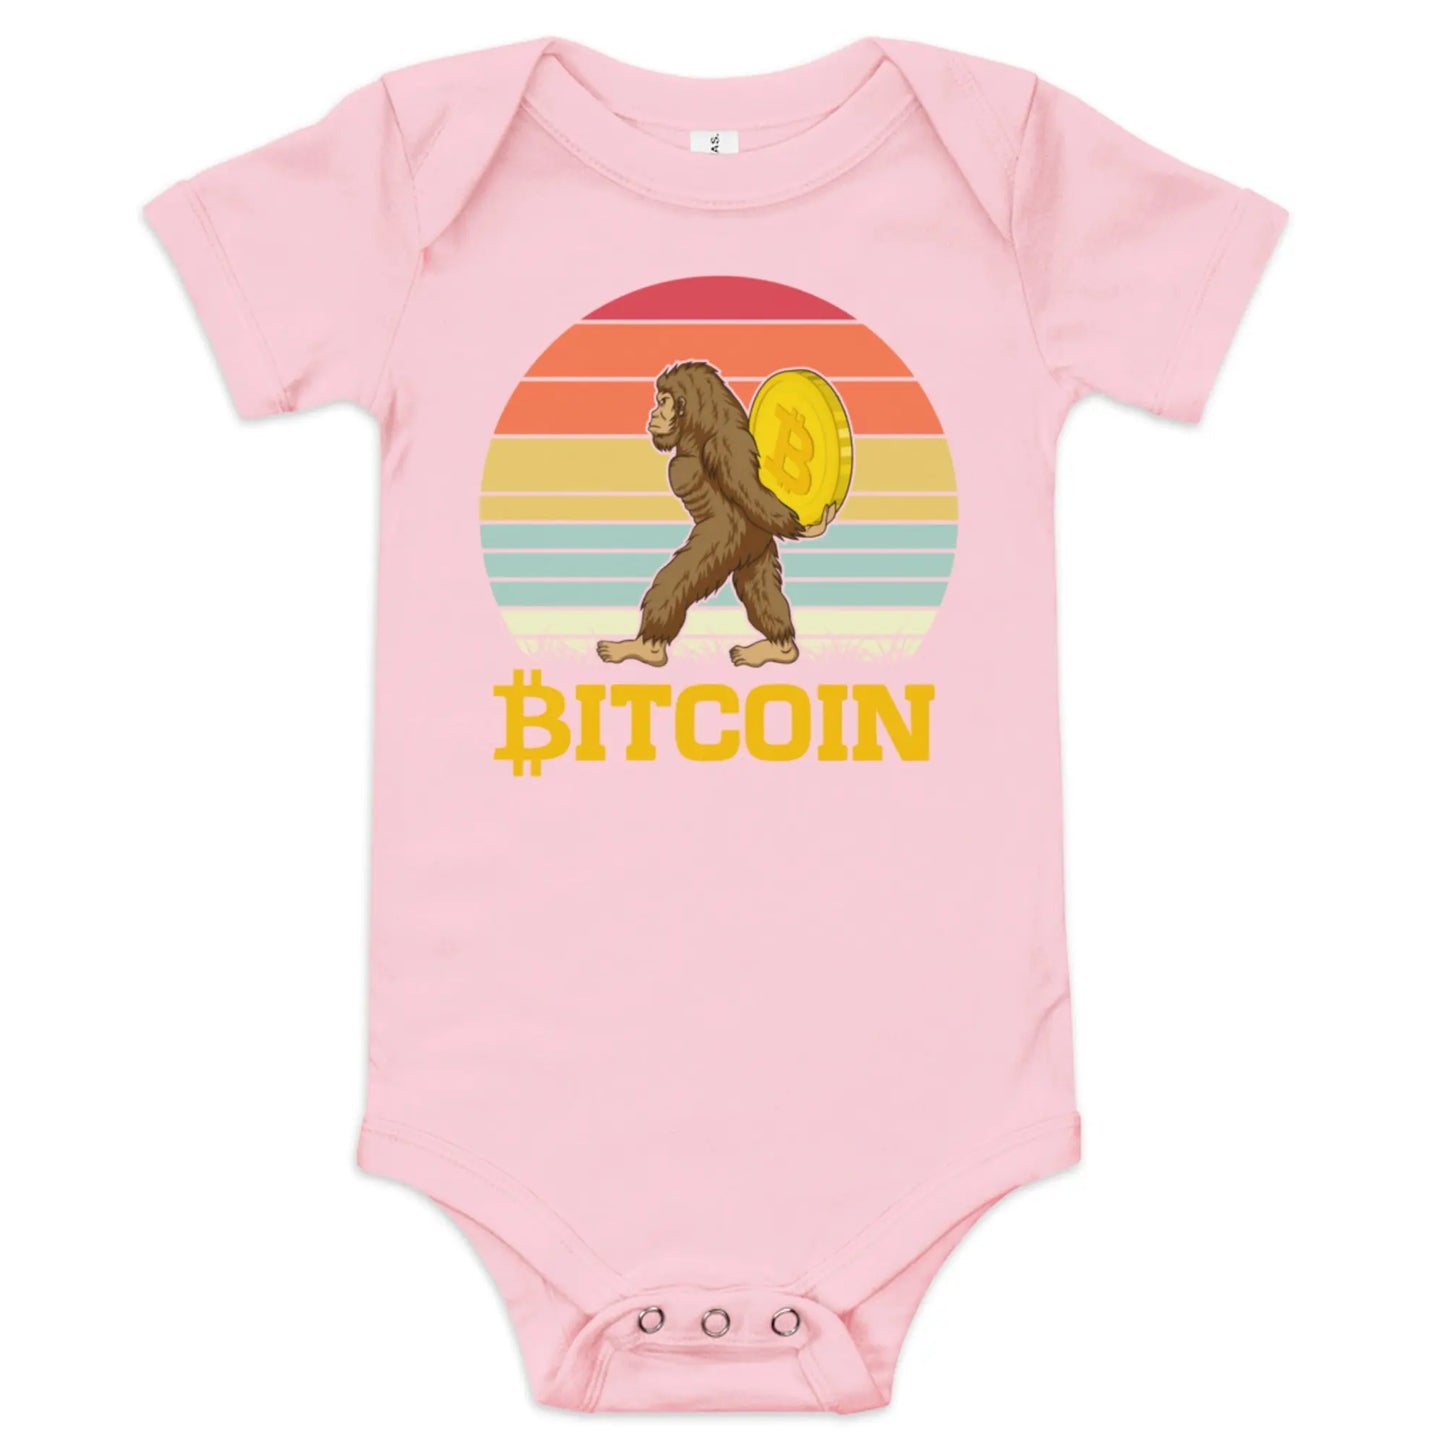 Big Foot - Baby Bitcoin Body Suit - One Piece with Short Sleeve Pink